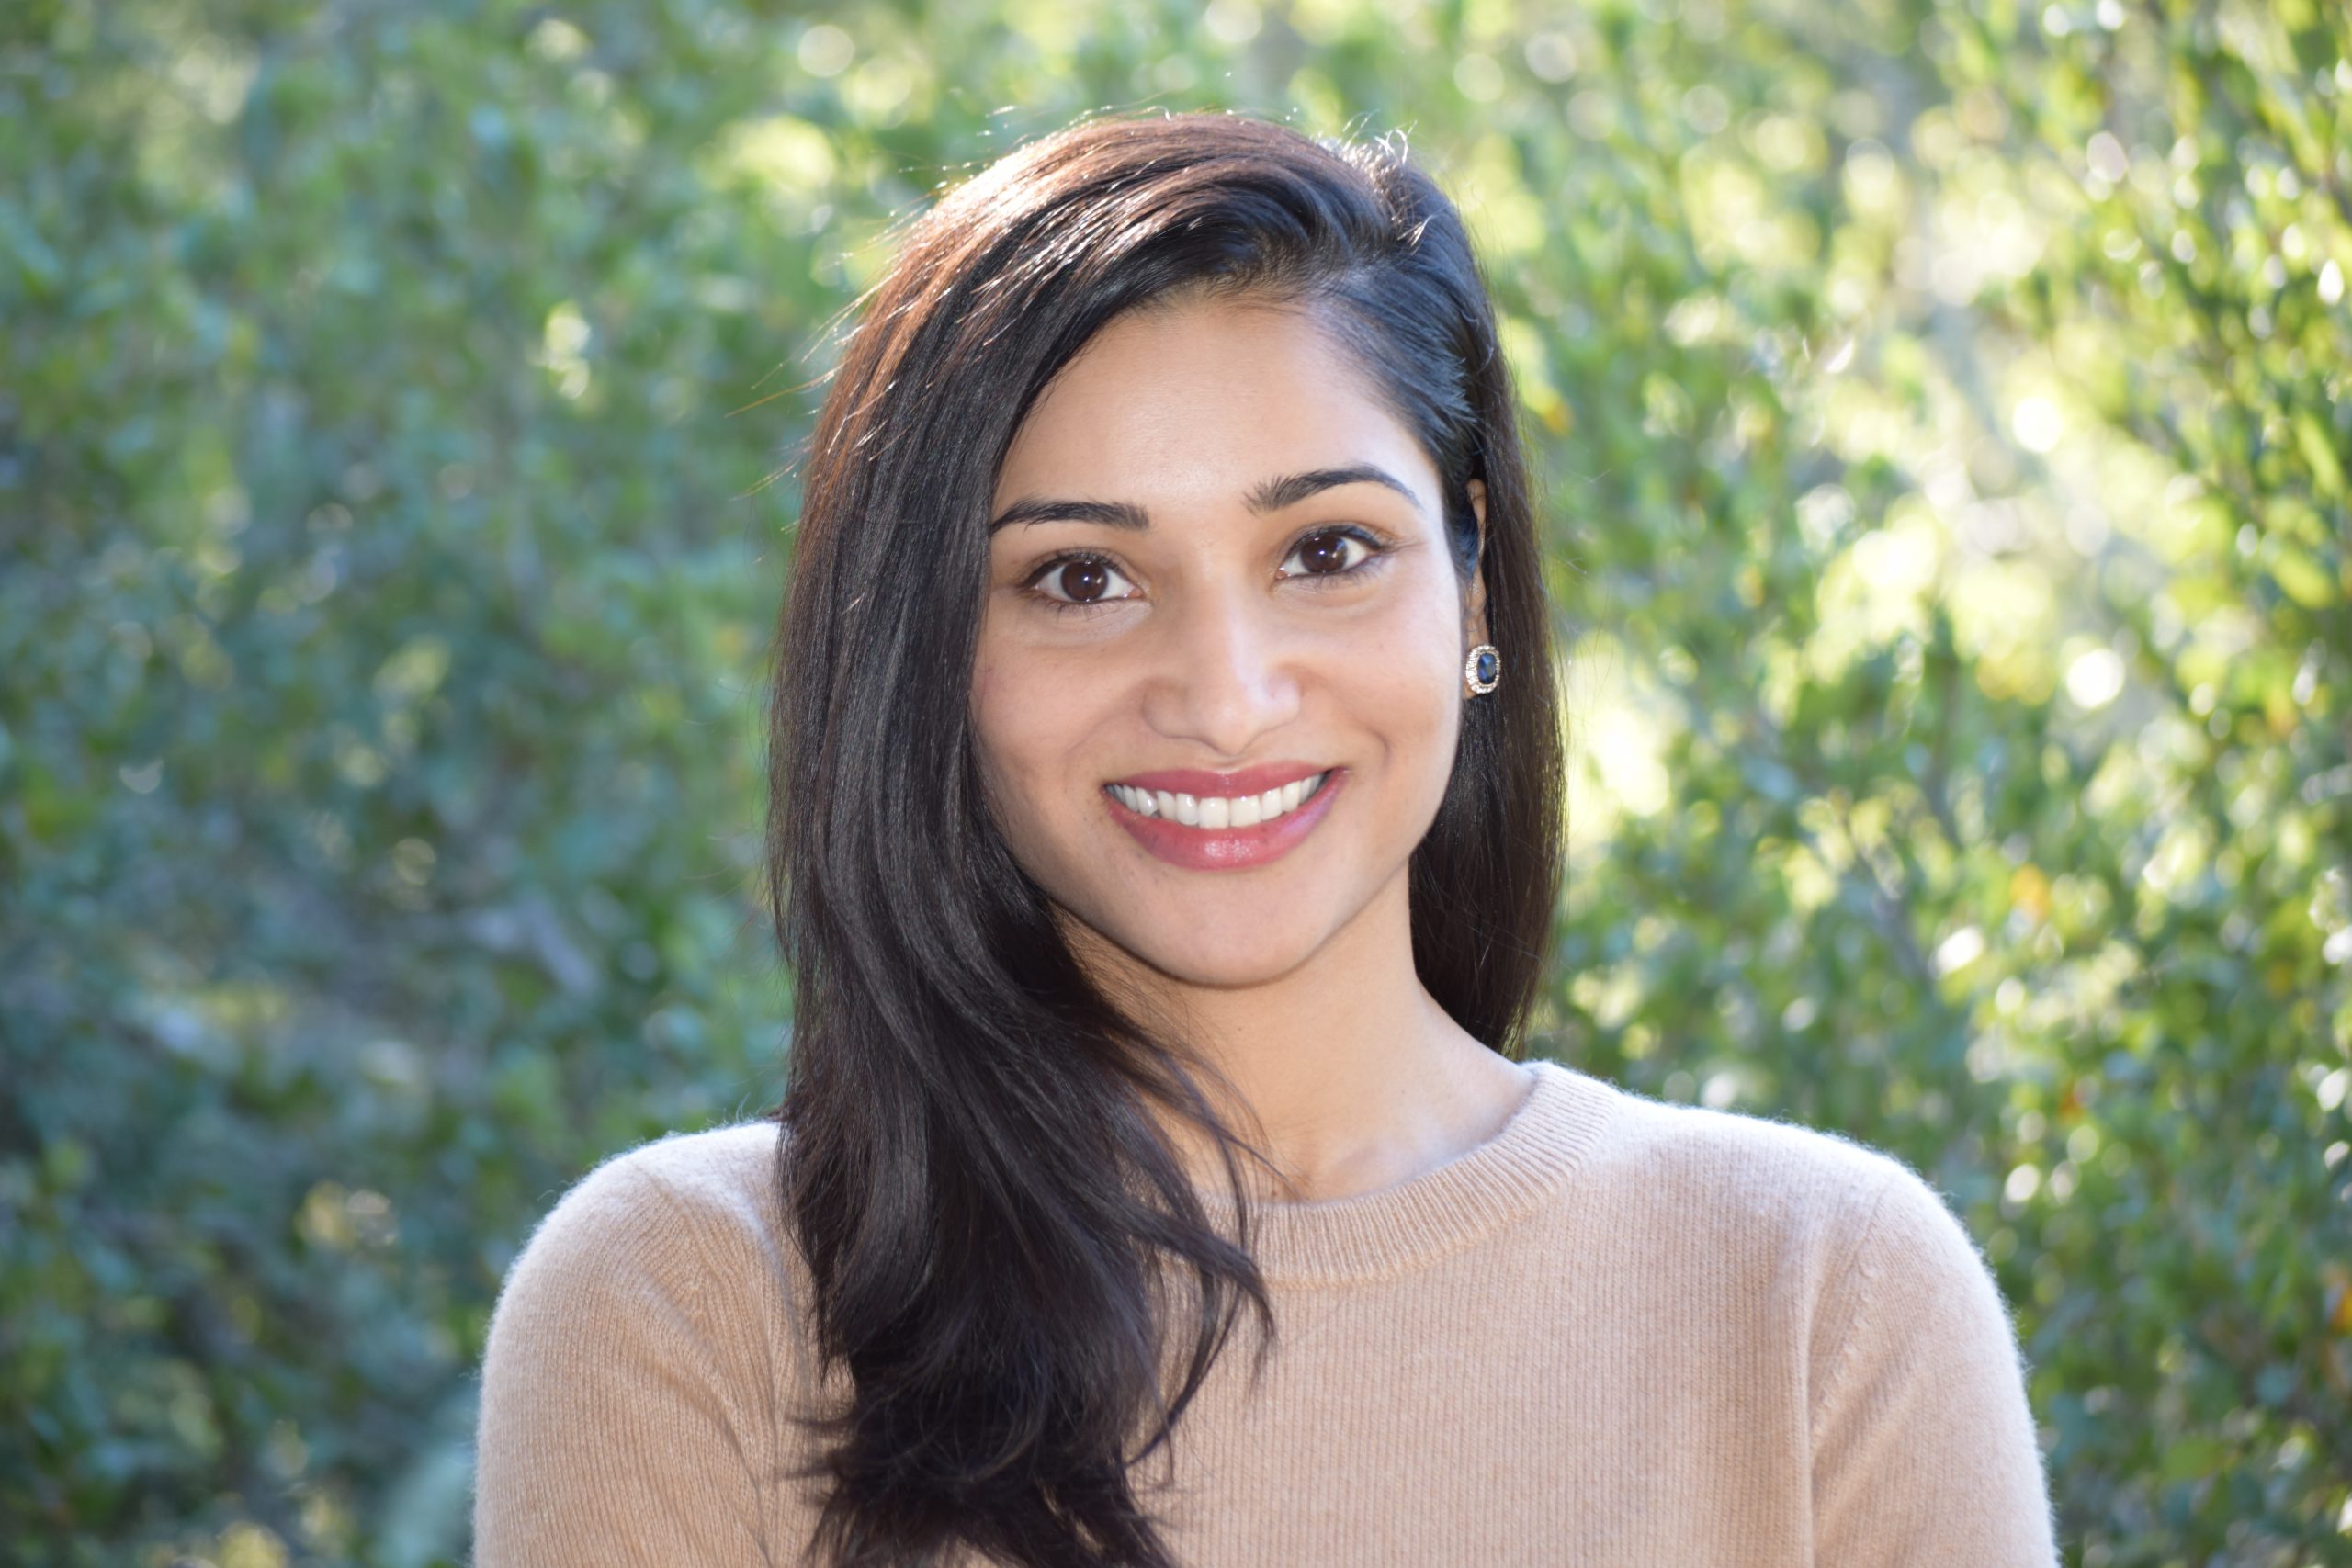 Aaratee Rao, principal group engineering manager, at Microsoft Teams in the Bay Area, embraces her most authentic self as a women in technology